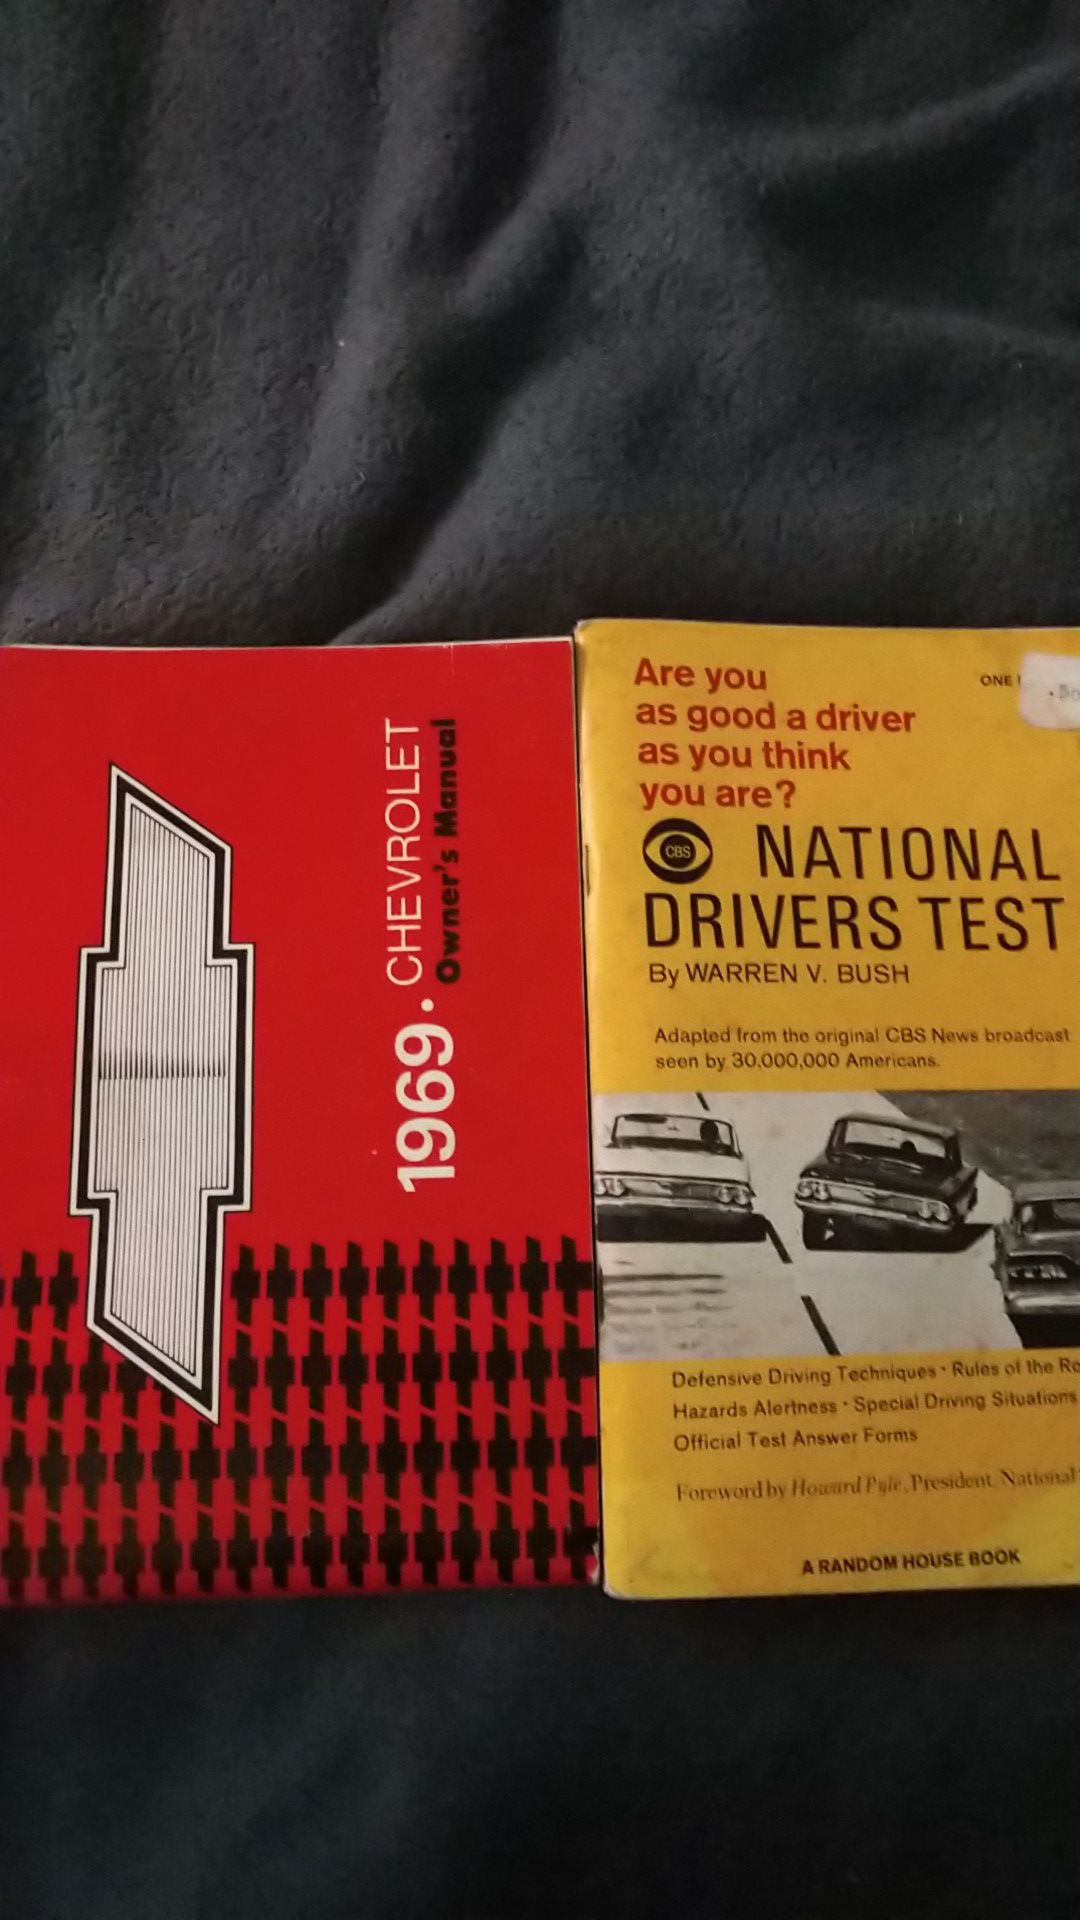 1969 Chevrolet owners manual and CBS NDT